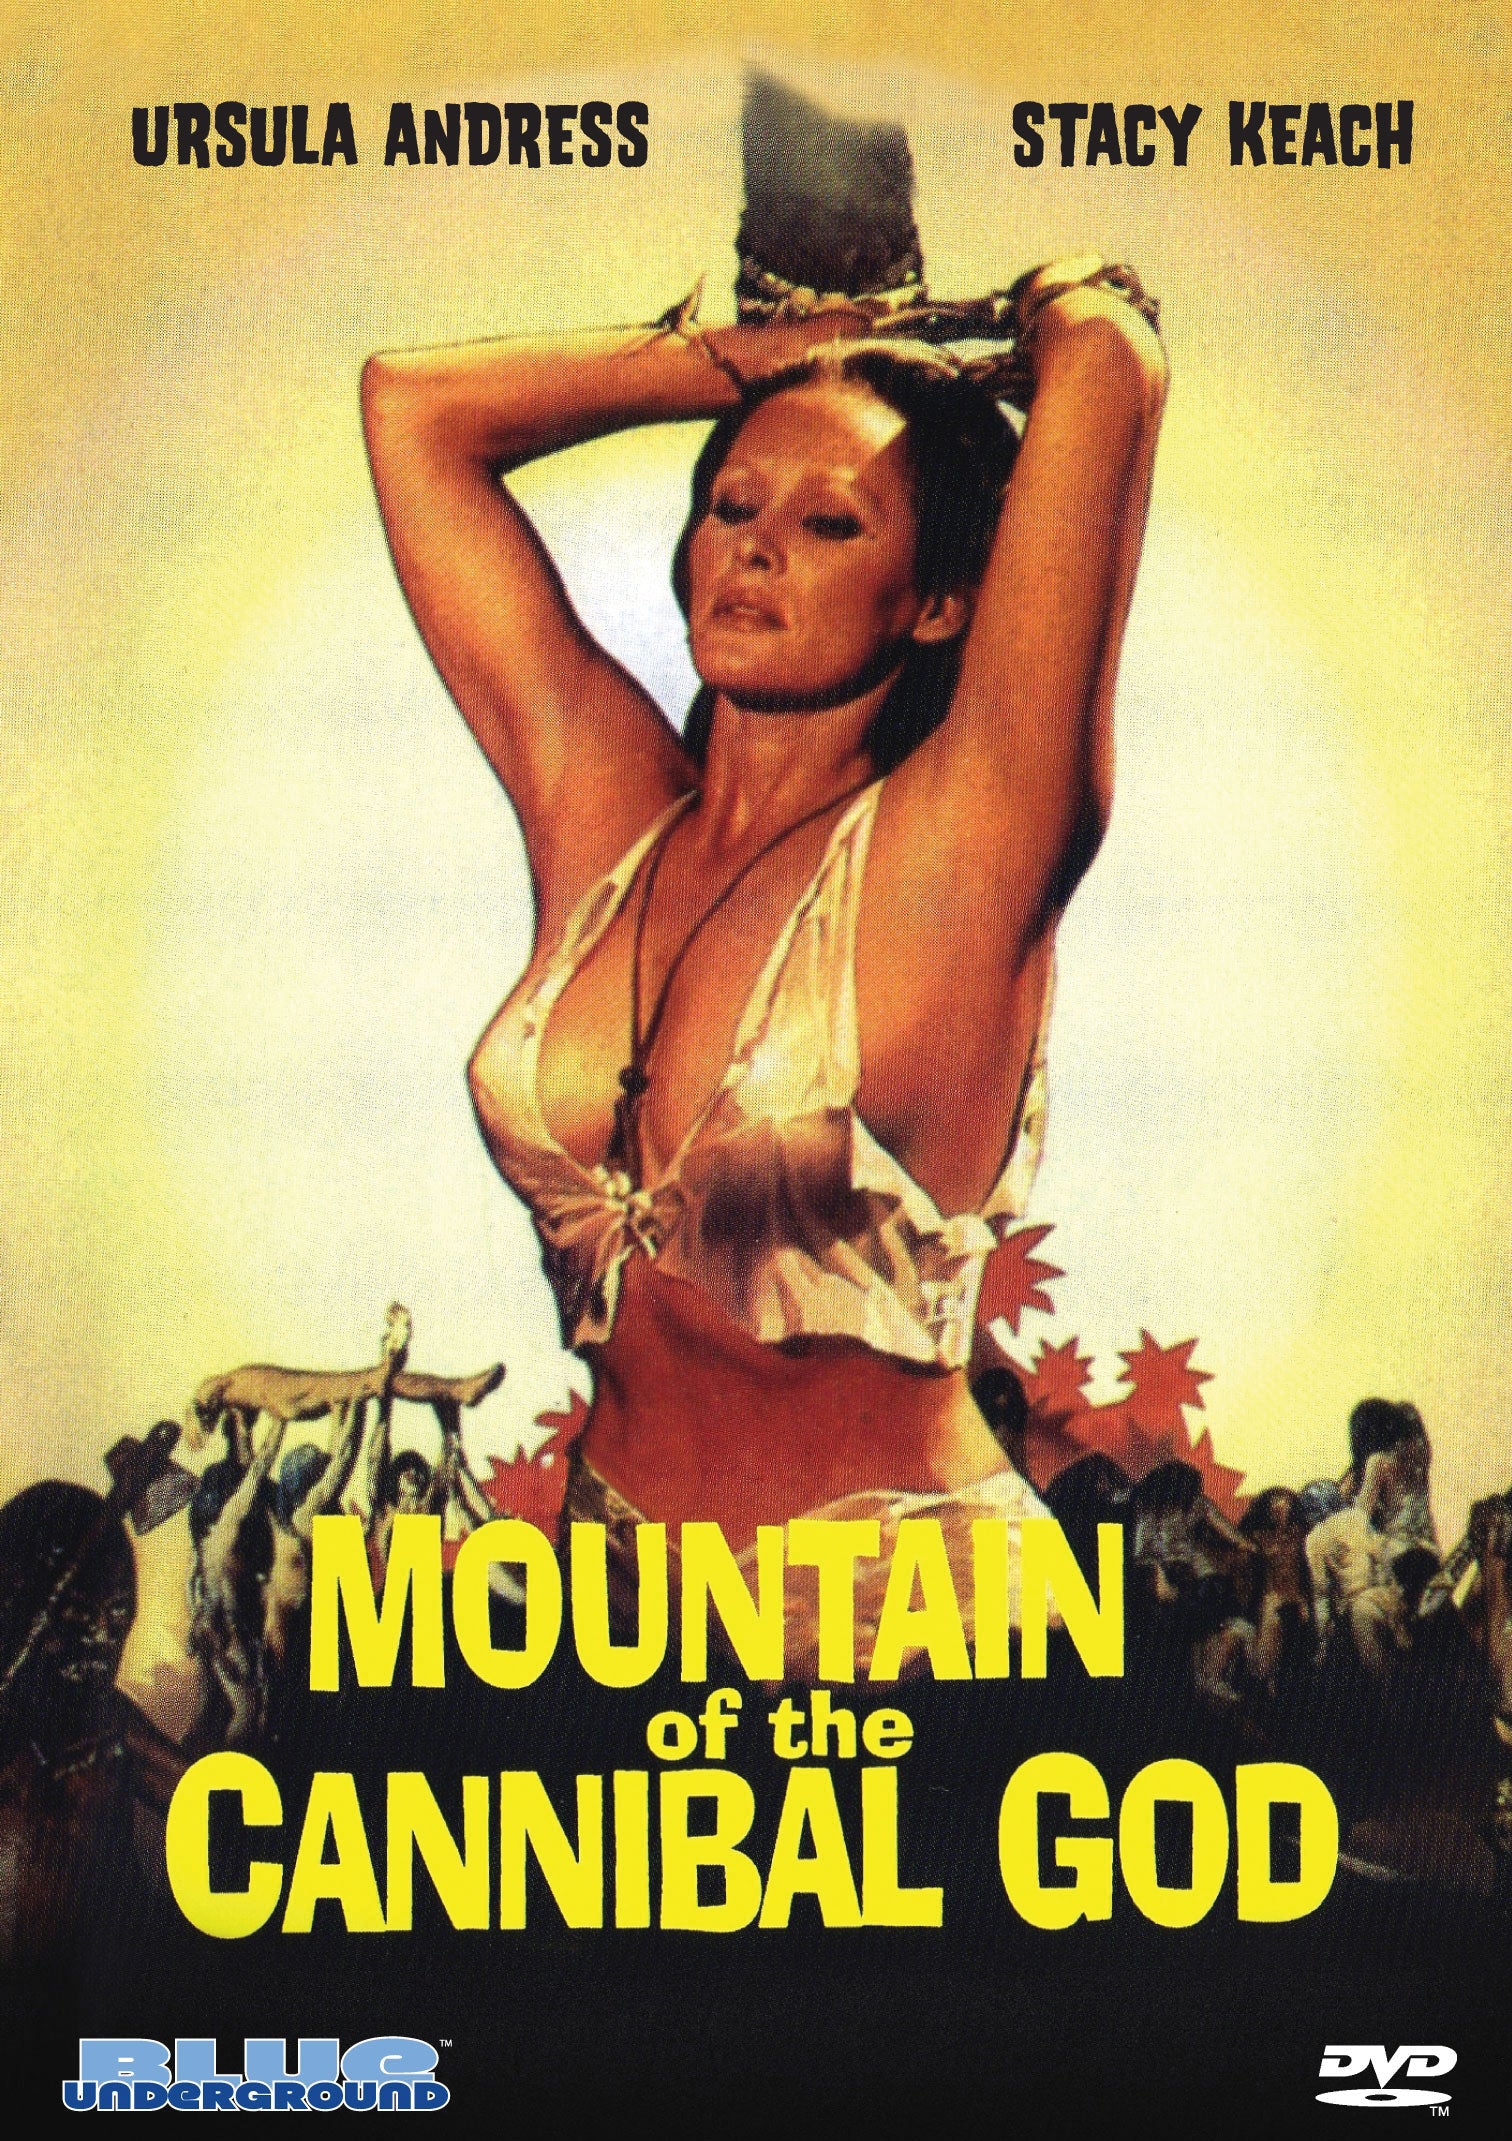 MOUNTAIN OF THE CANNIBAL GOD DVD